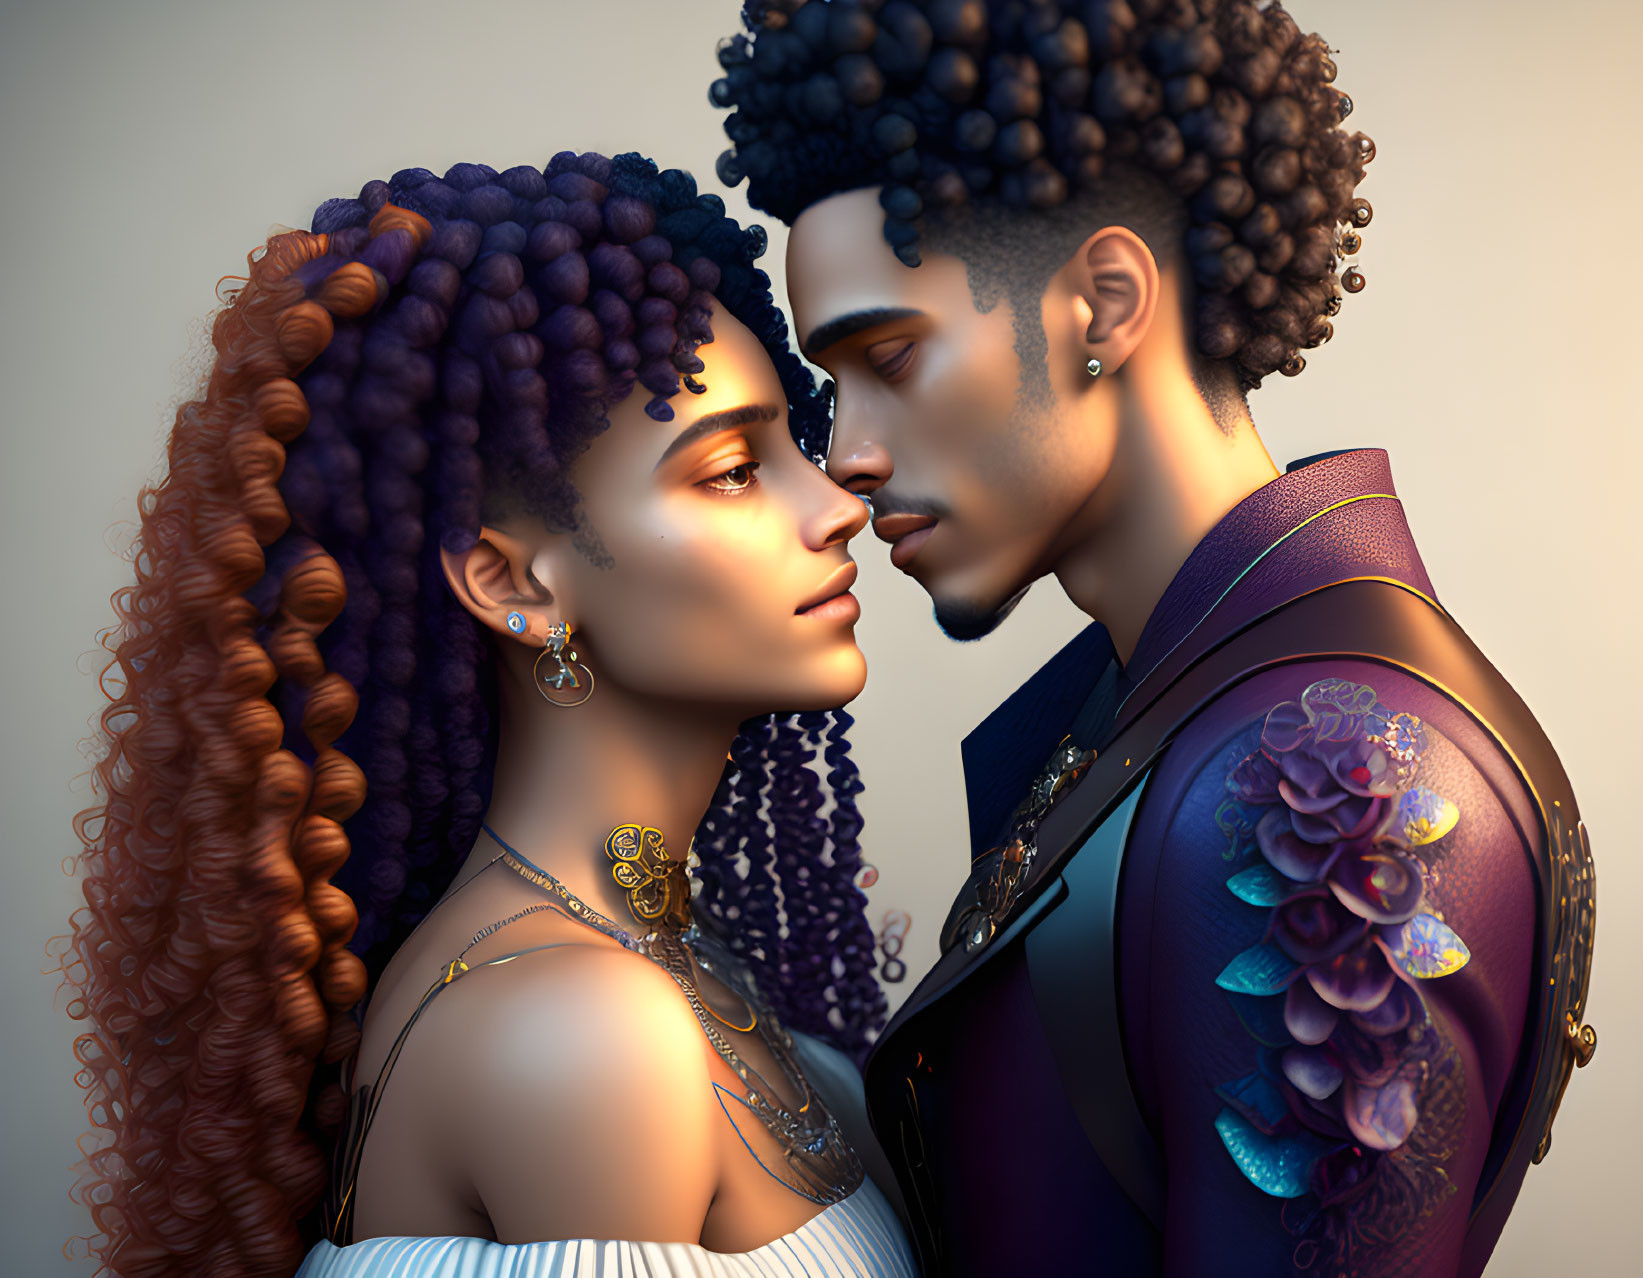 Detailed digital characters with curly hair in stylized clothing touching foreheads.